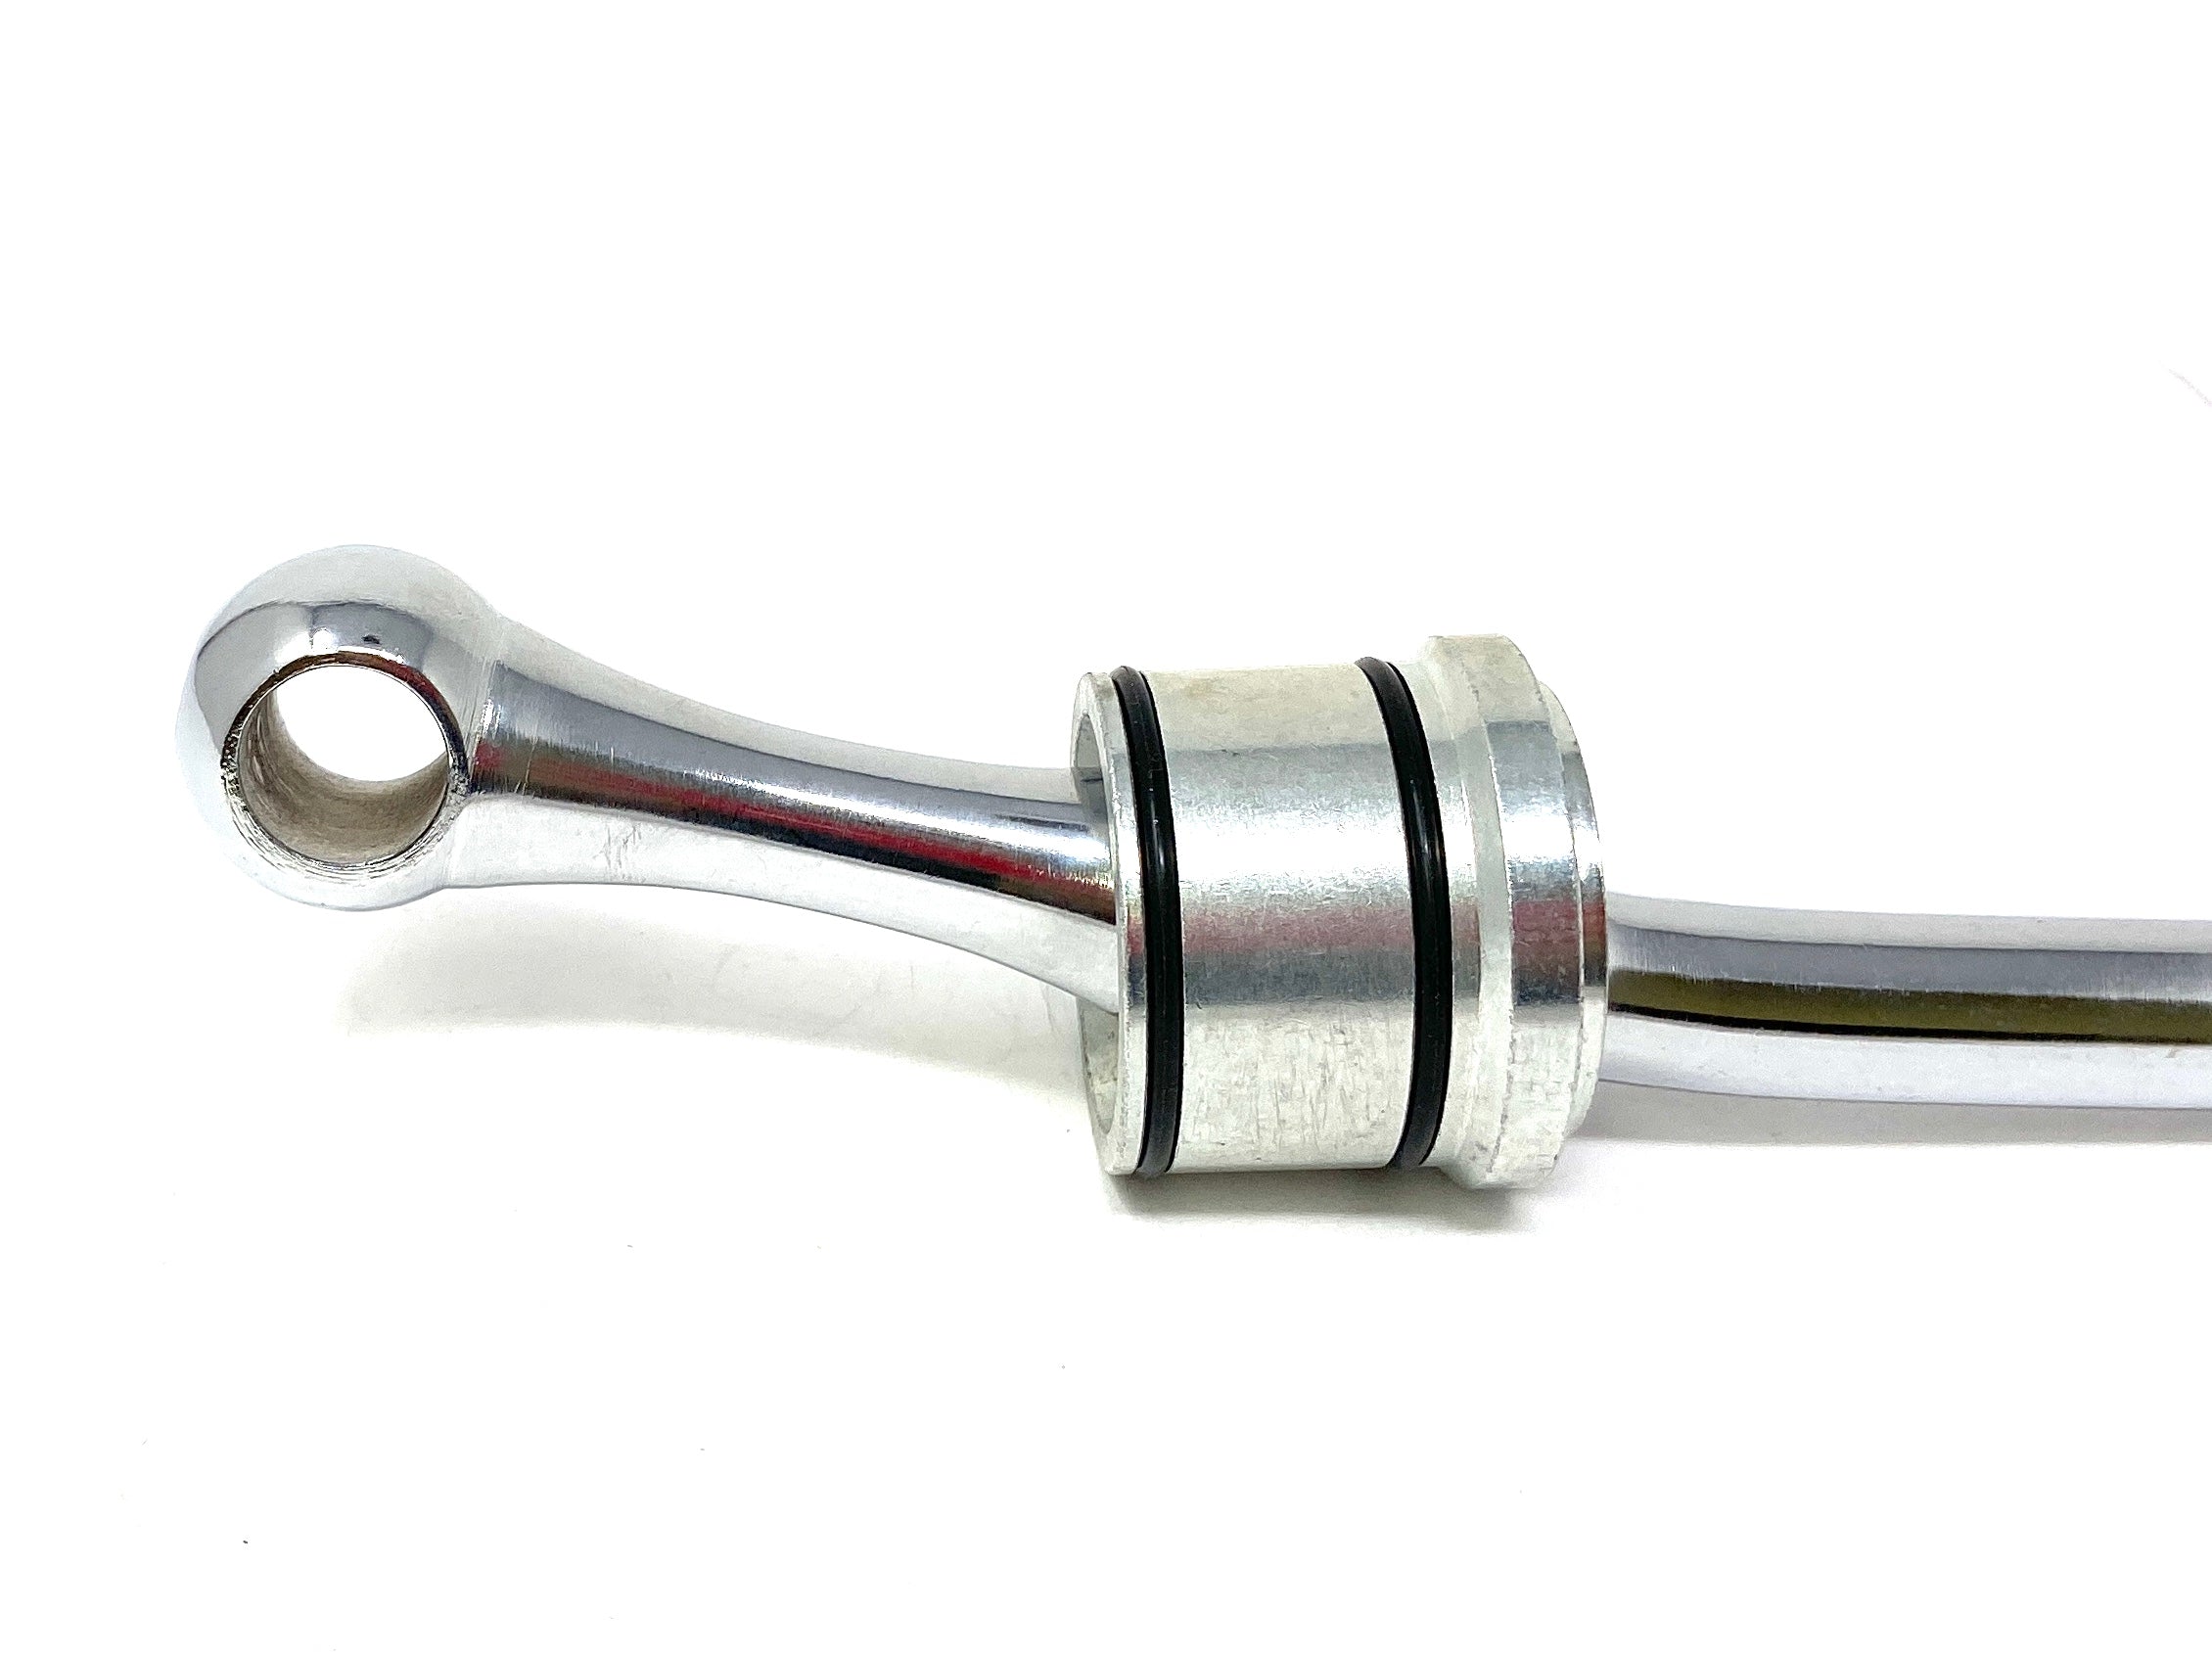 Short Shifter for Ford Probe 93-97